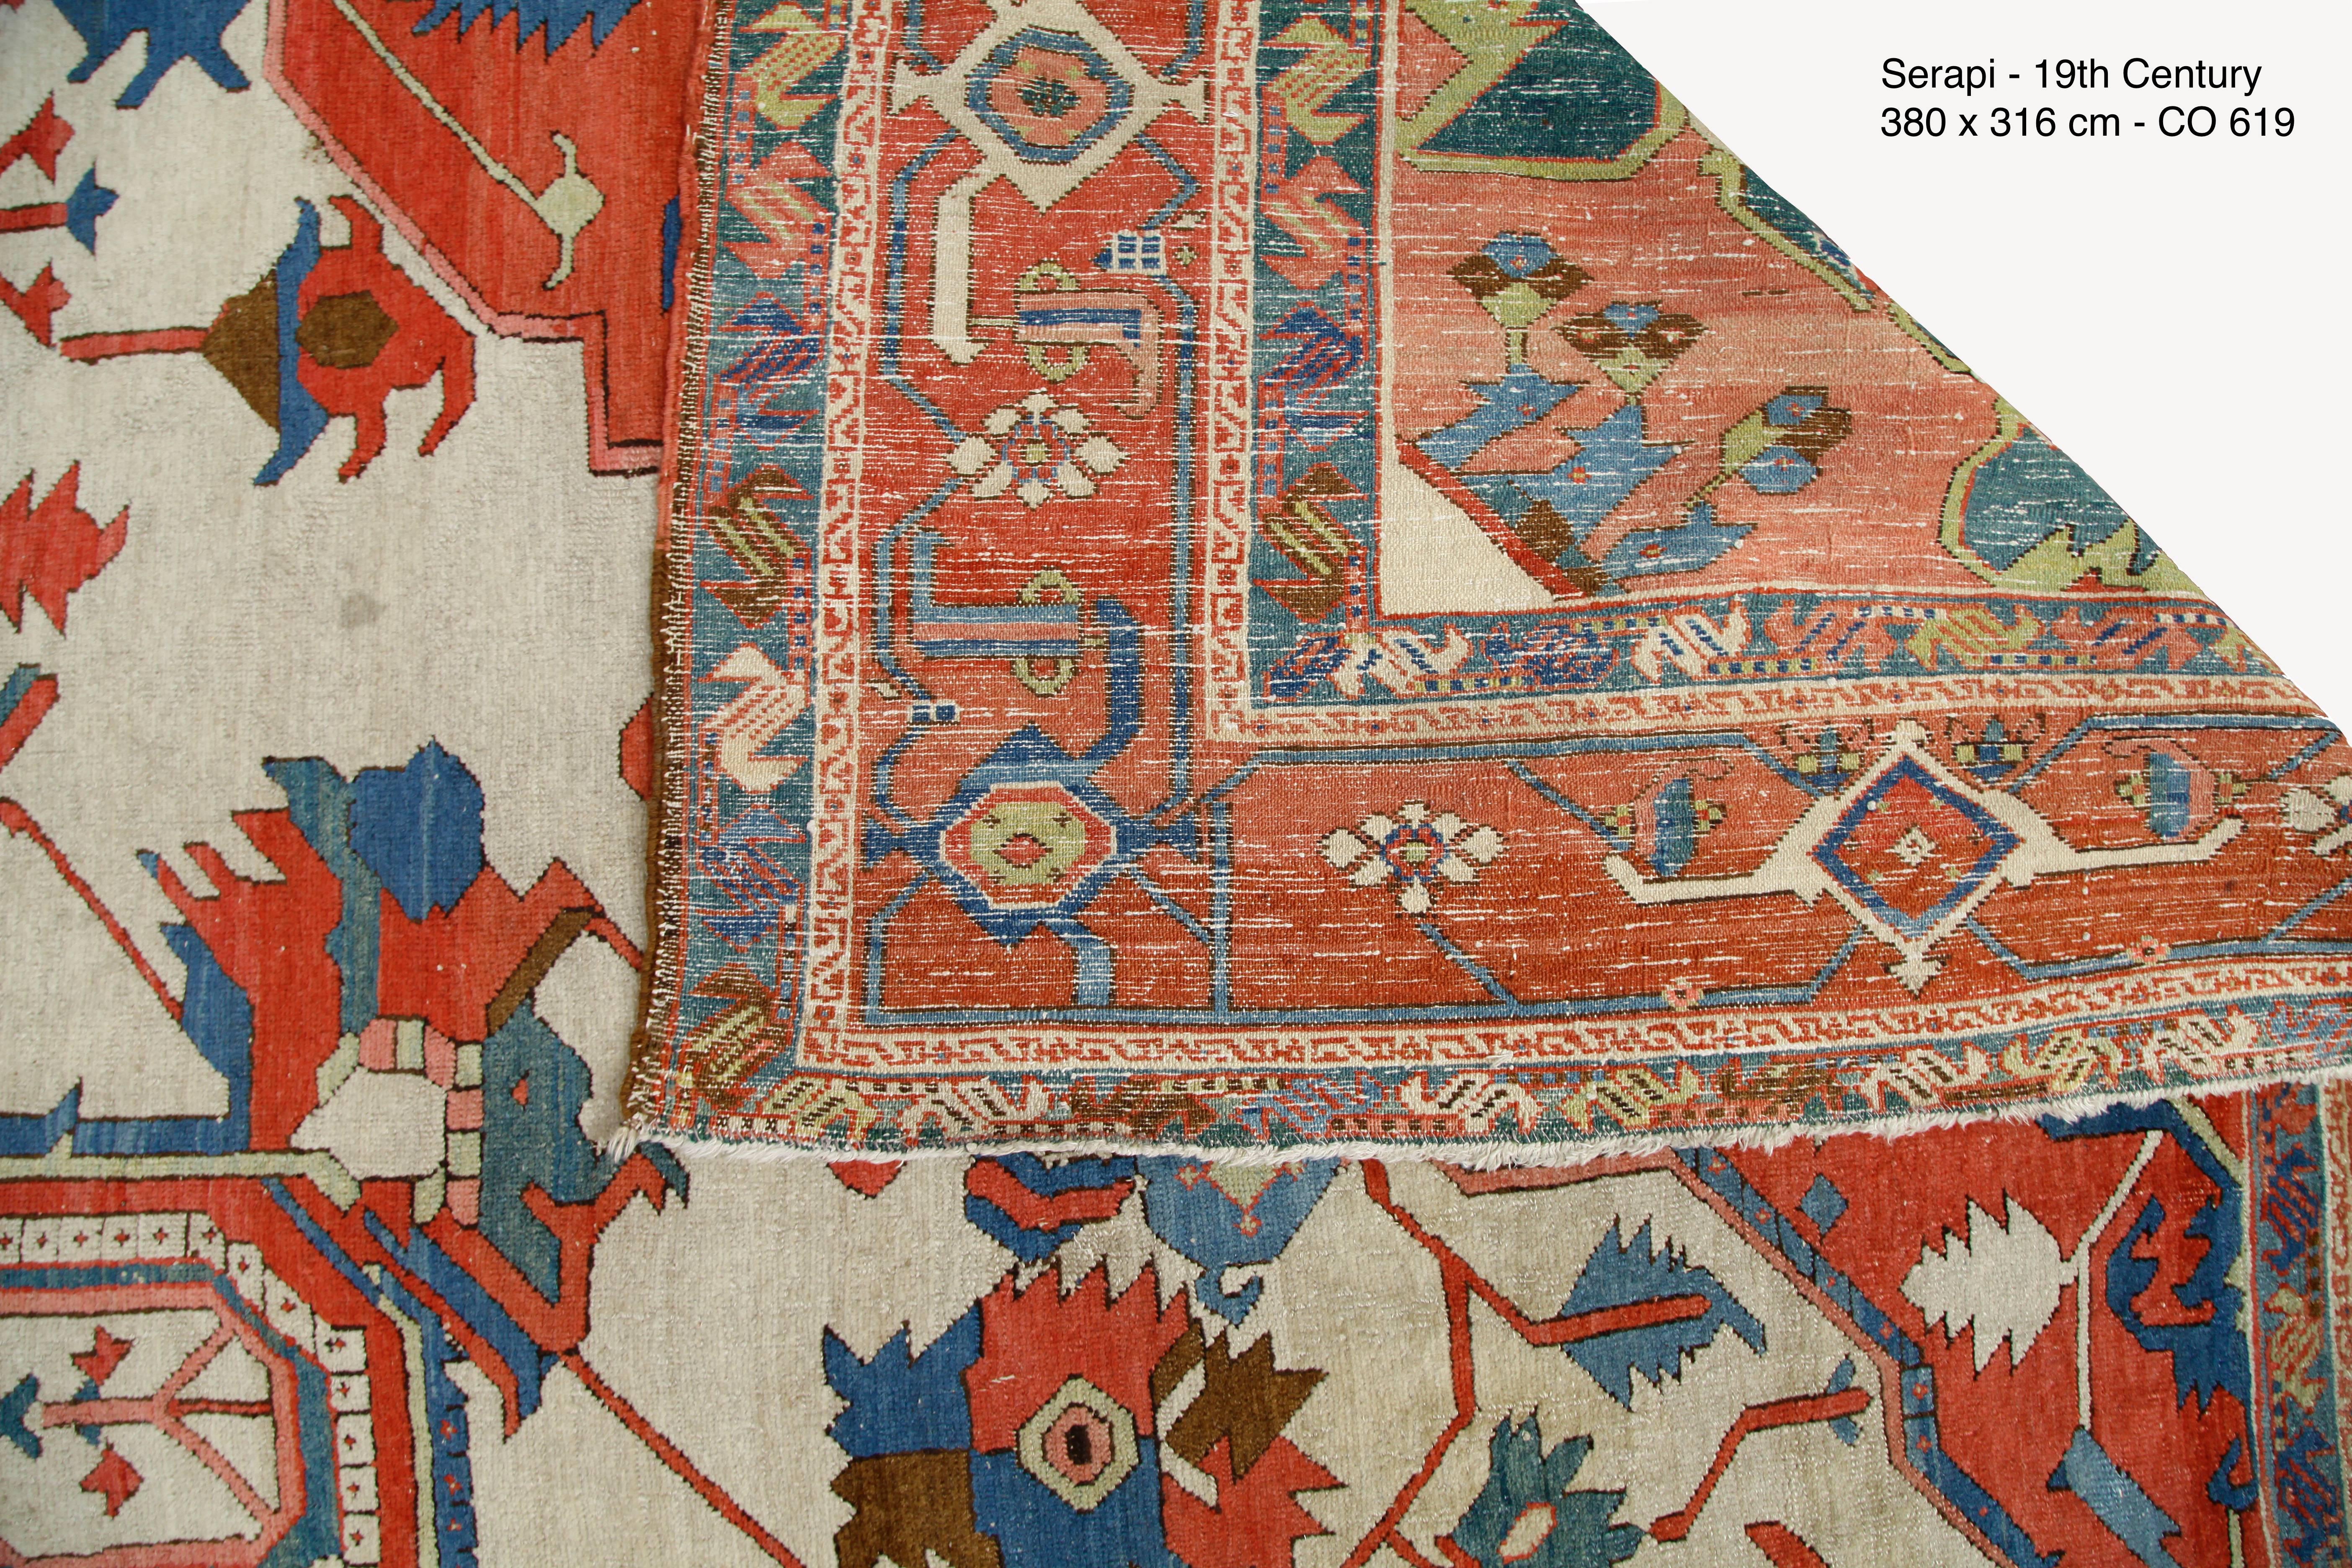 Antique Serapi carpets - The carpets of northwest Persia are in a class of their own. Prized for their strong geometric style, fine construction and rich colors, the carpets of Heriz, Serapi and Bakshaish are regional cousins that share mutual